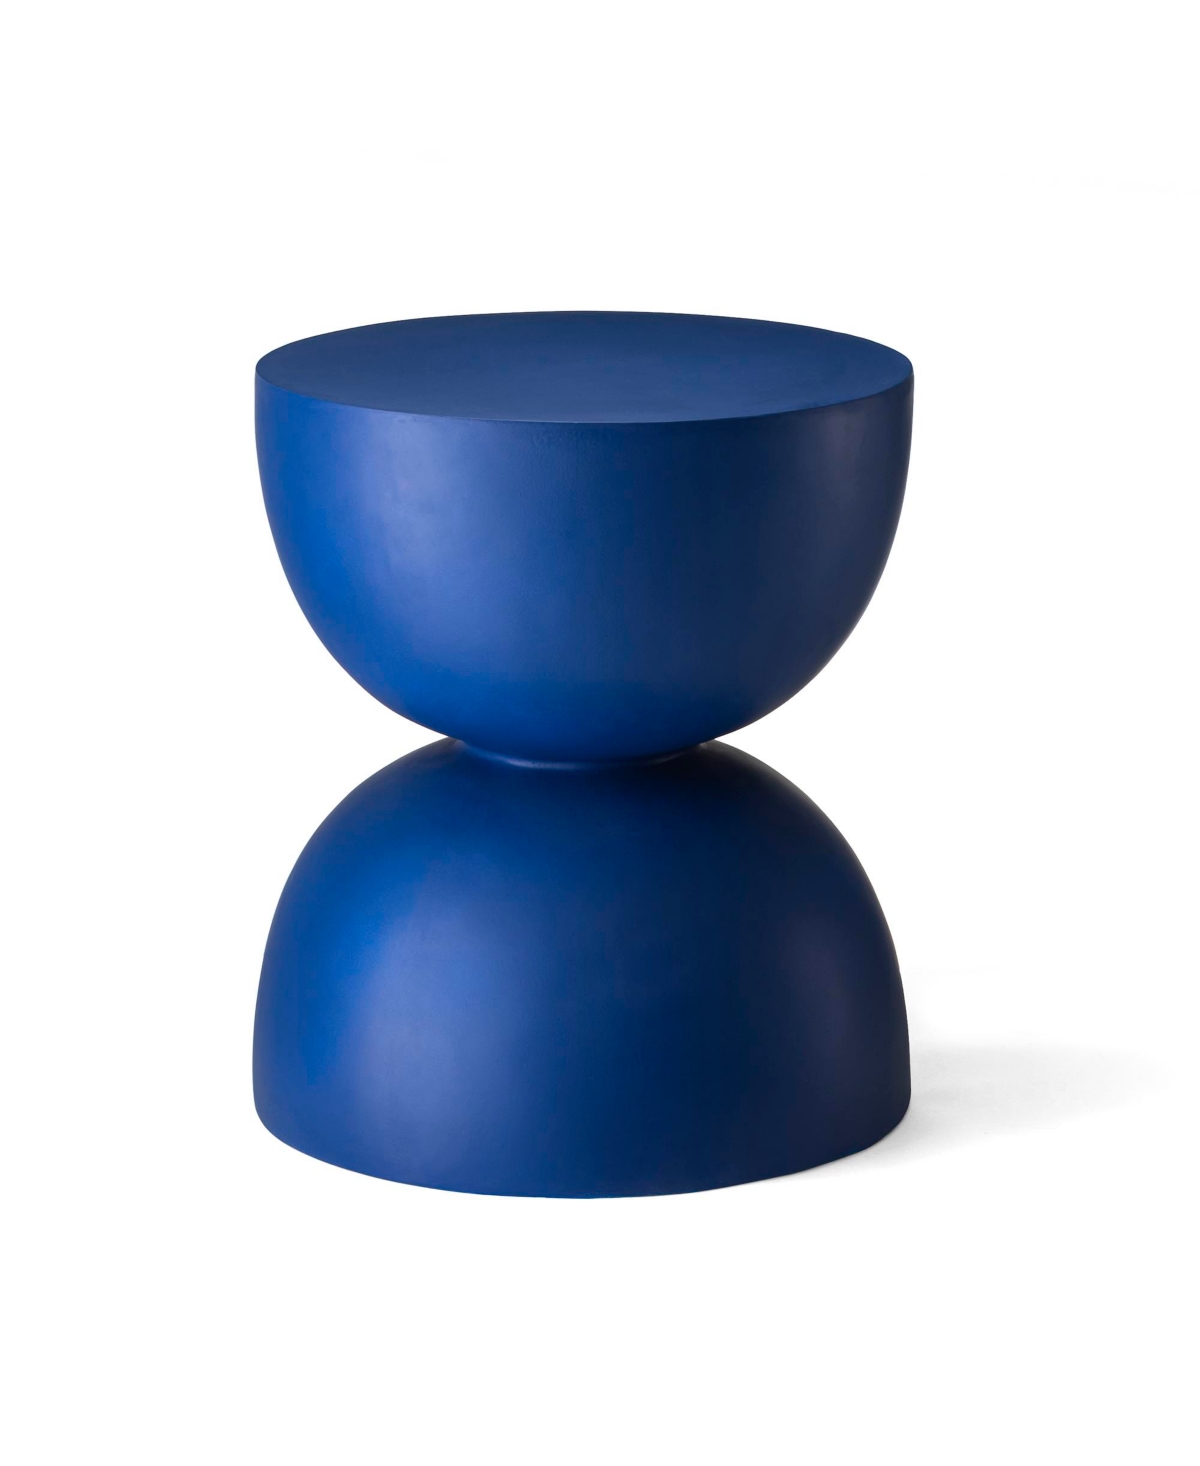 17.75'' H Multi-Functional Magnesium Oxide Cobalt Garden Stool or Planter Stand or Accent Table - Blue